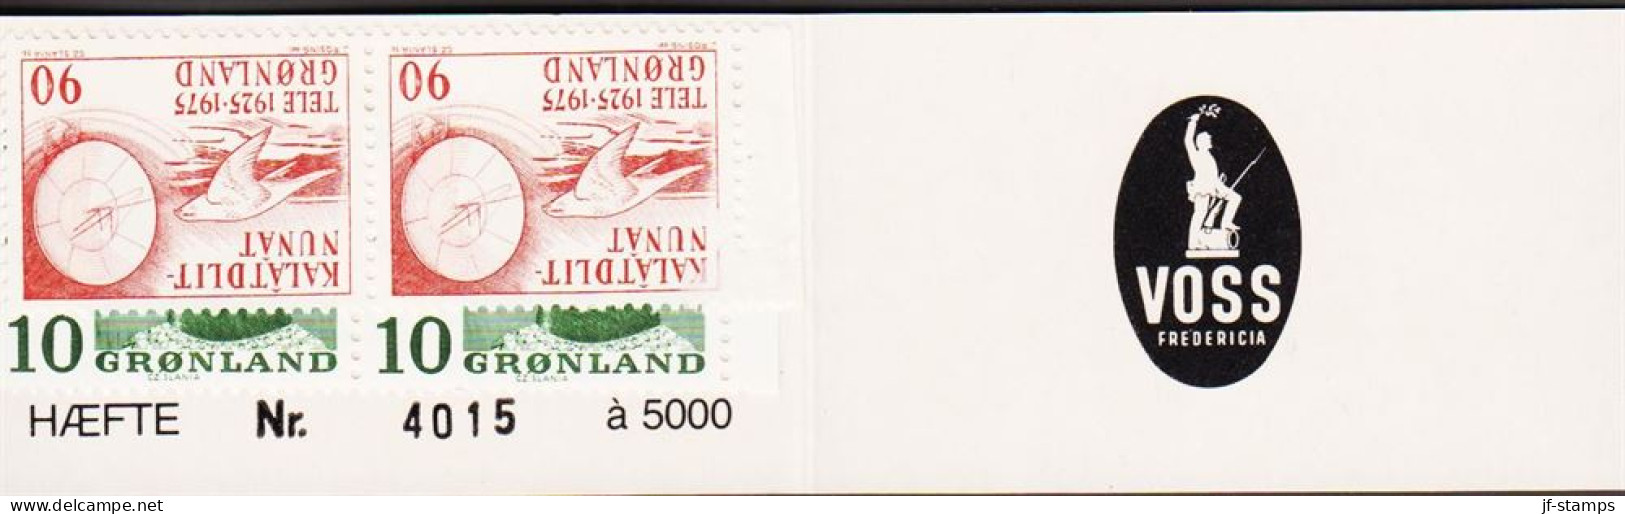 1977. GRØNLAND. TELE 90 Øre Falcon In Pair Together With 10 Øre Margrethe In Pair. DANSK ... (Michel 94 + 84) - JF545612 - Unused Stamps